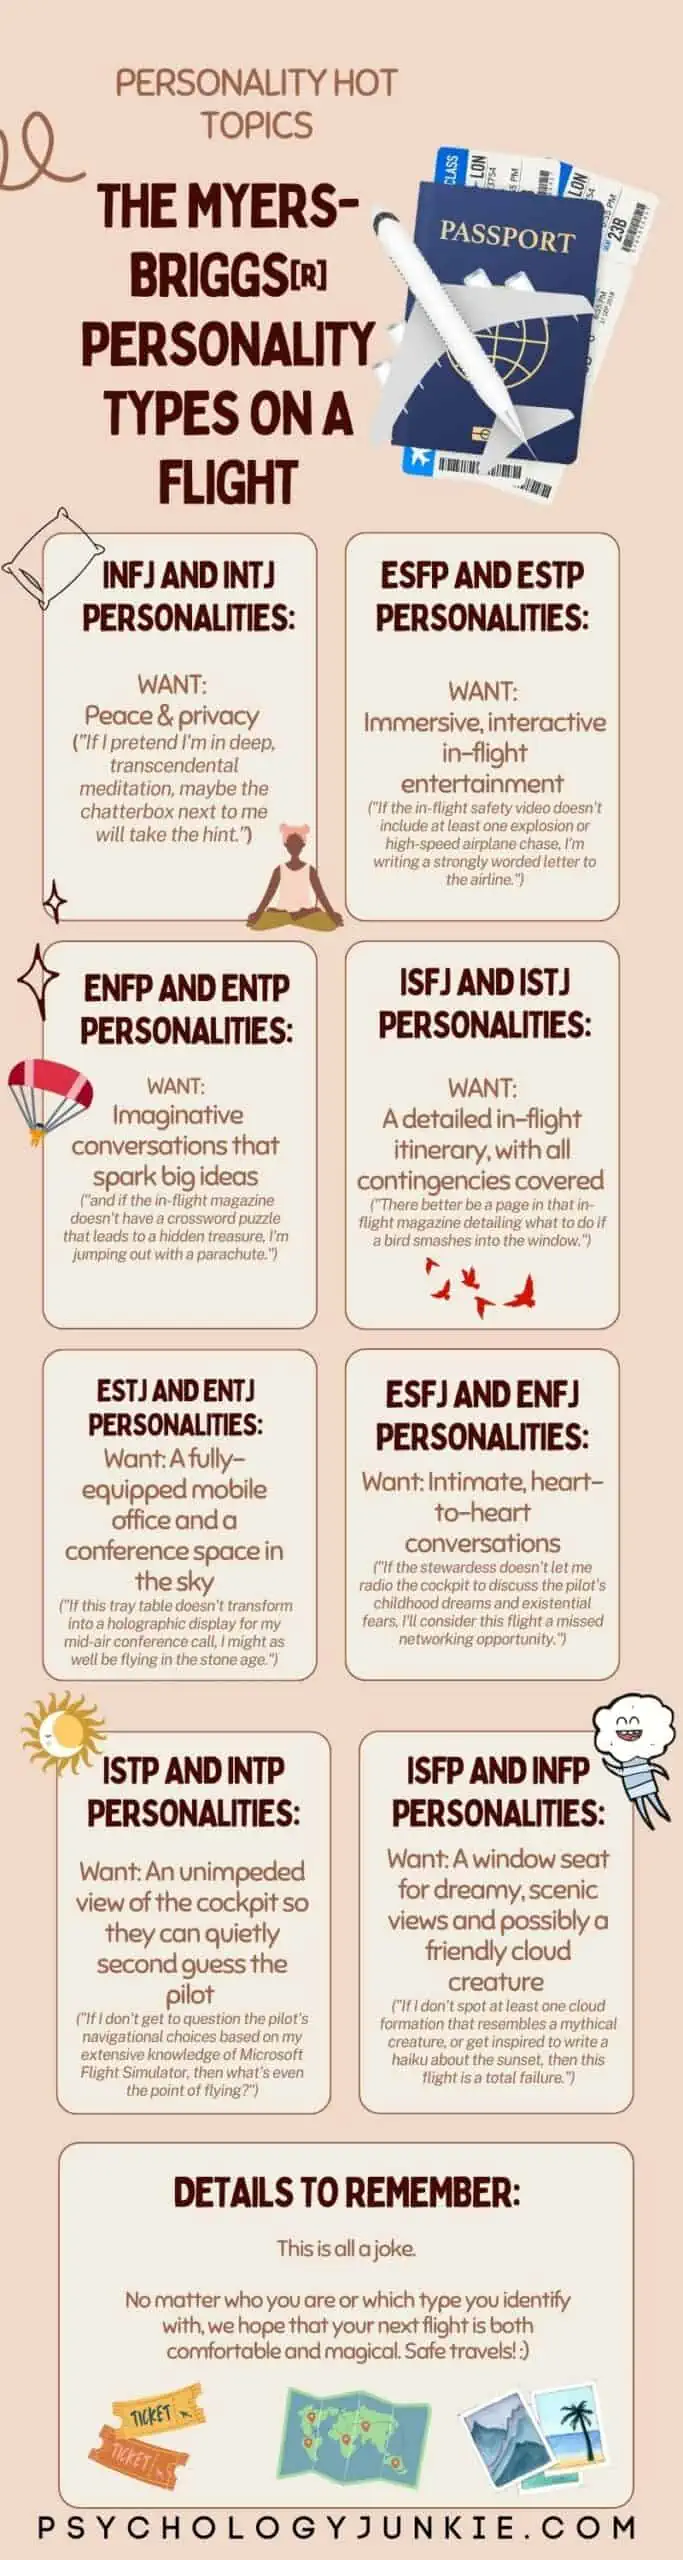 Oscar MBTI Personality Type: INFP or INFJ?